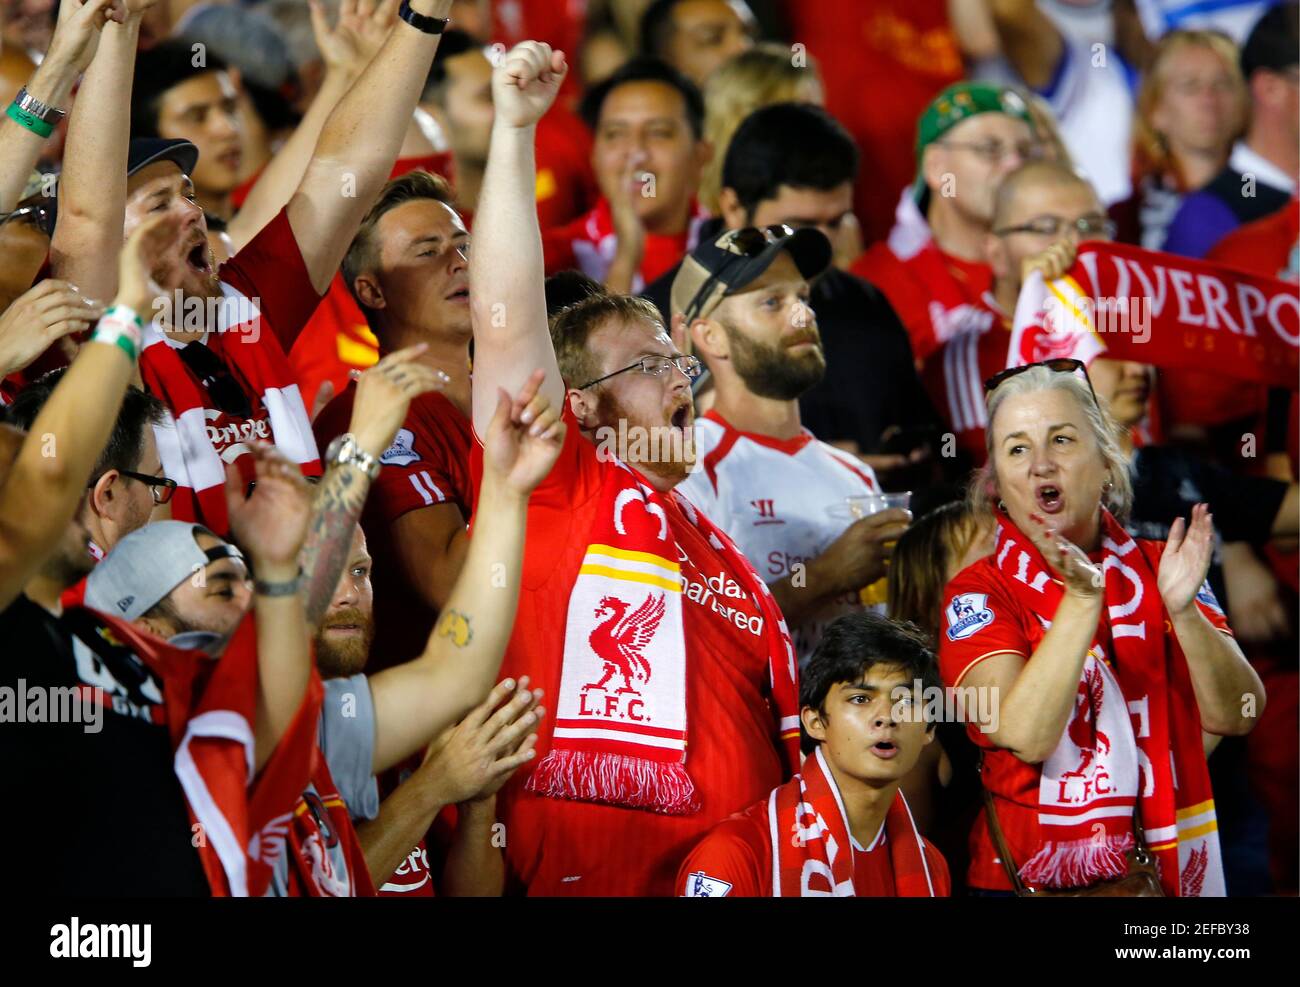 Football Liverpool V Chelsea International Champions Cup Rose Bowl Pasadena California United States Of America 27 7 16 Liverpool Fans Before The Match Reuters Mike Blake Livepic Stock Photo Alamy